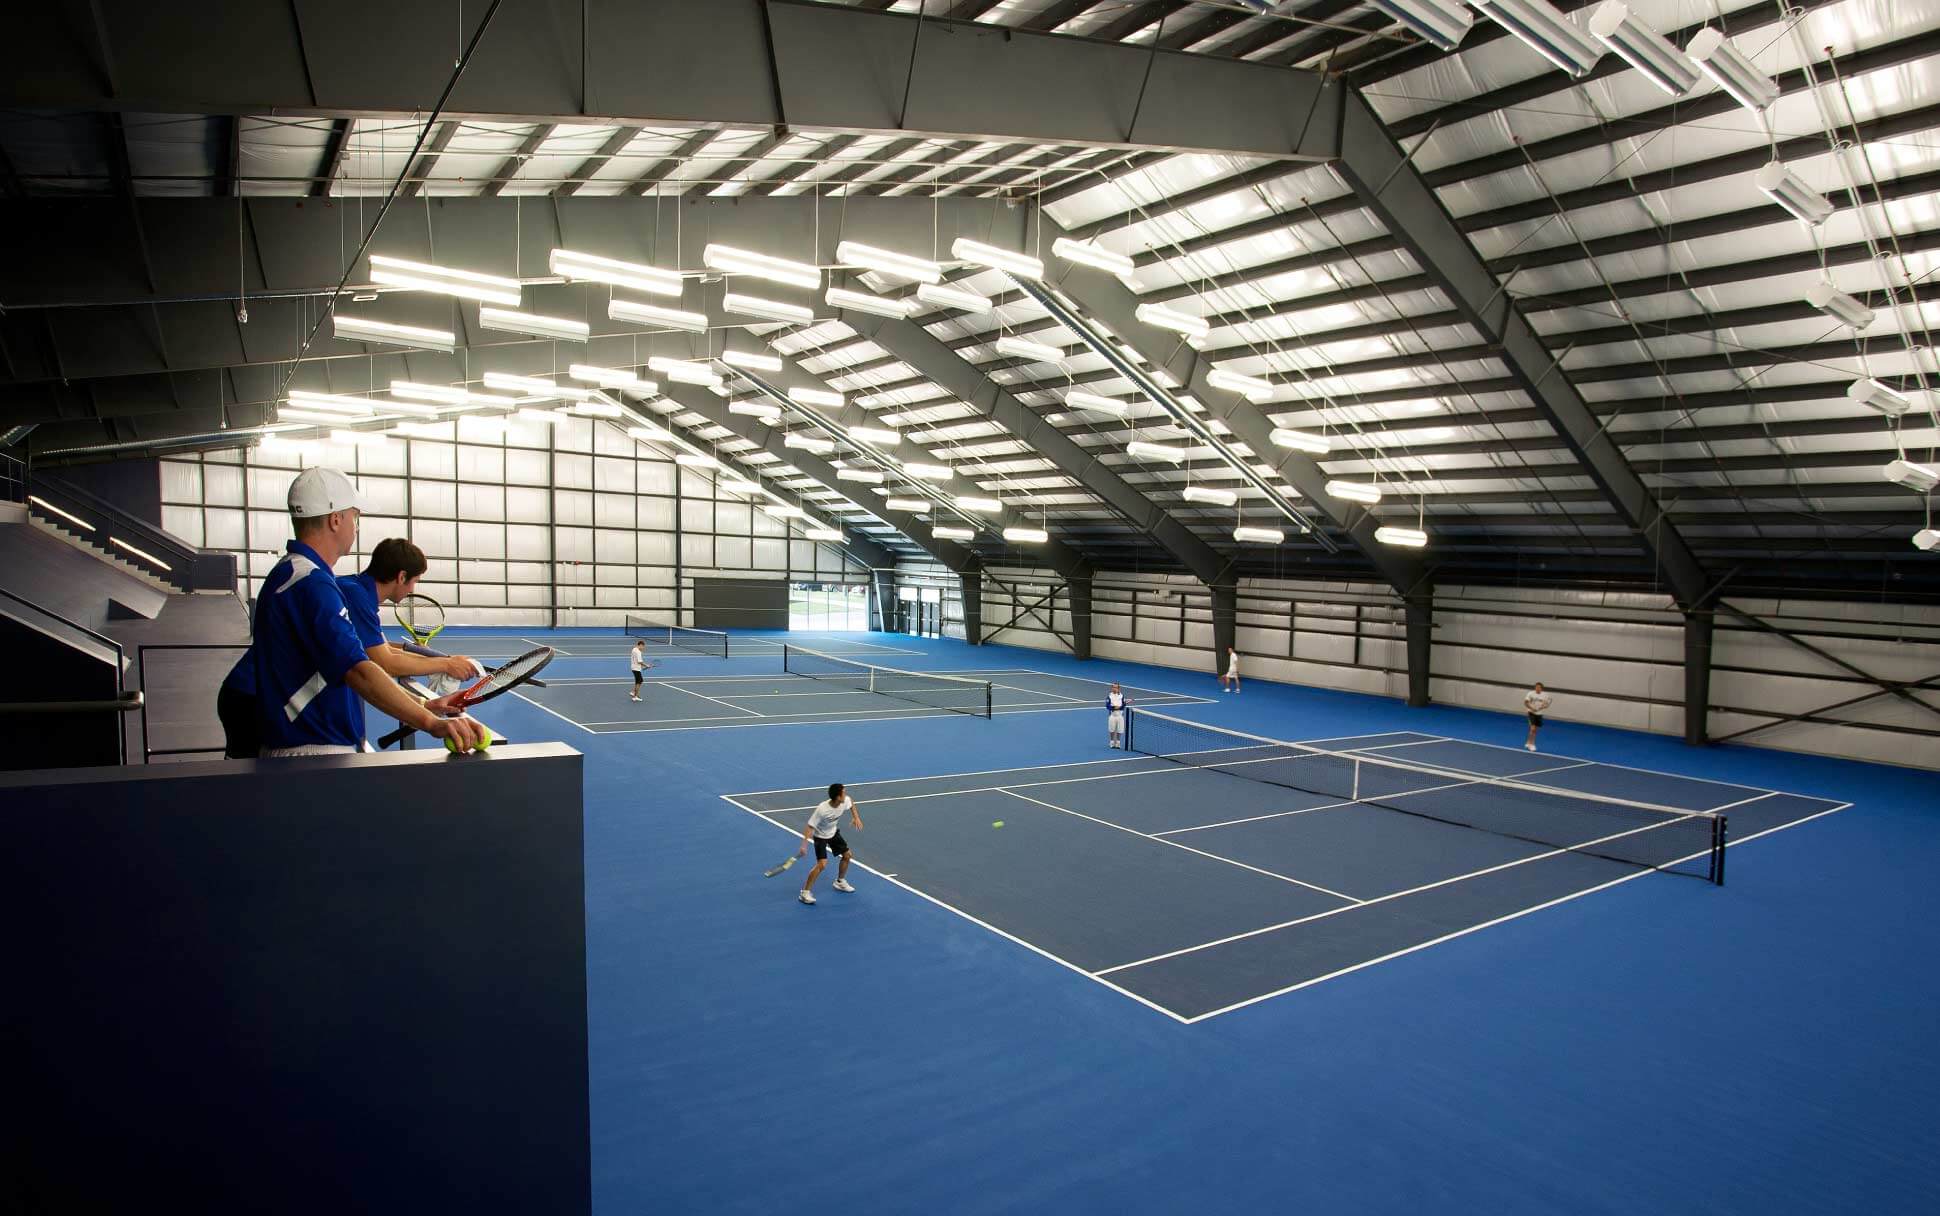 Two people play a game of tennis on an indoor court at the UBC Tennis Centre